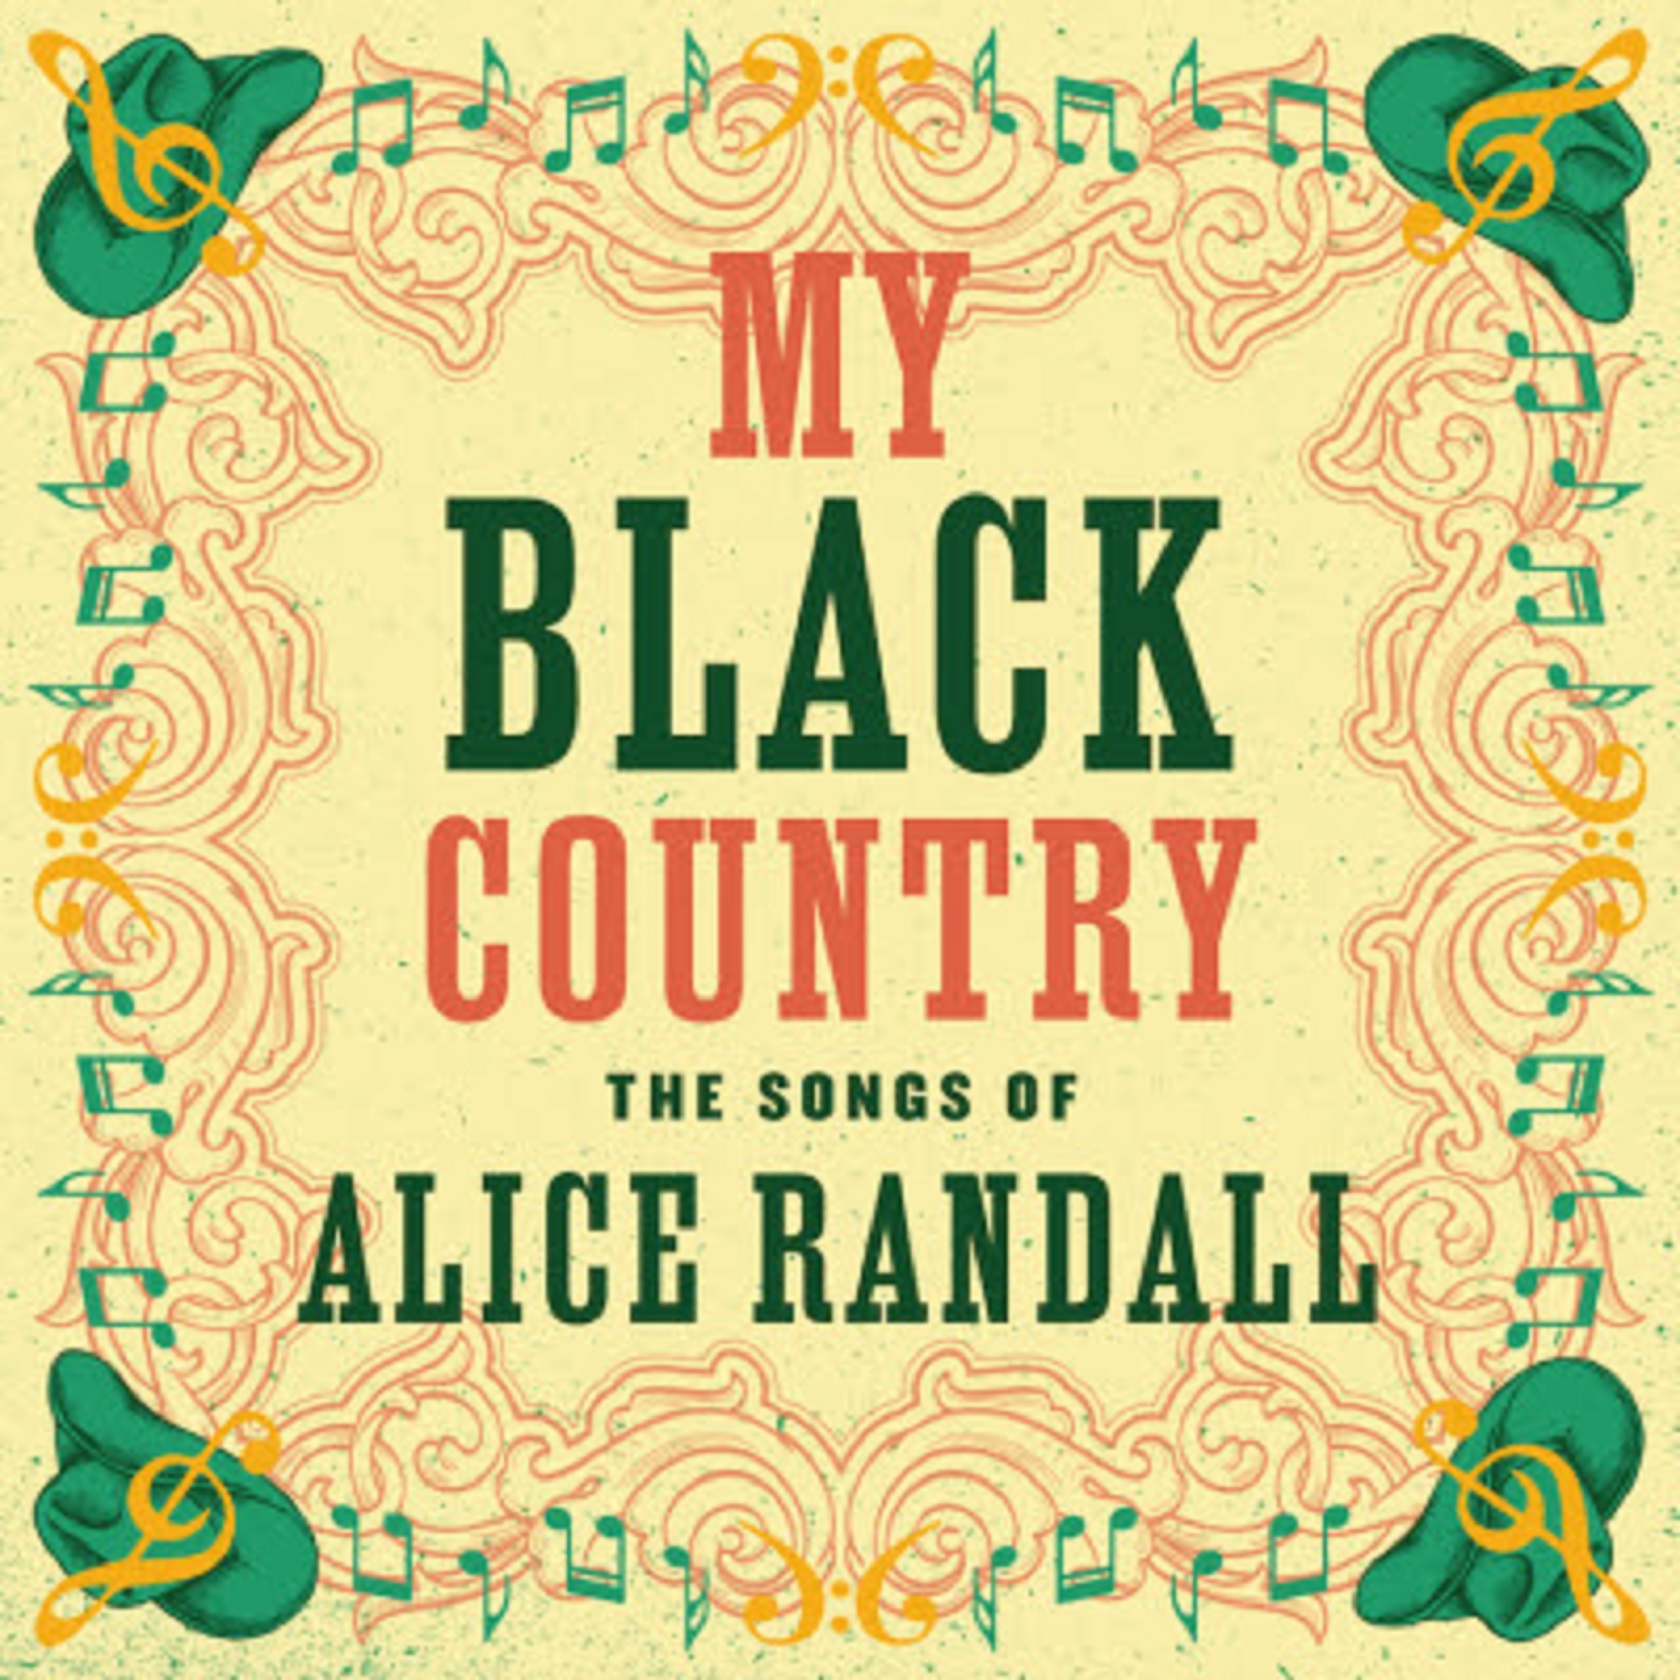 Alice Randall taps Rhiannon Giddens for Black Country music history lesson, new song out now External